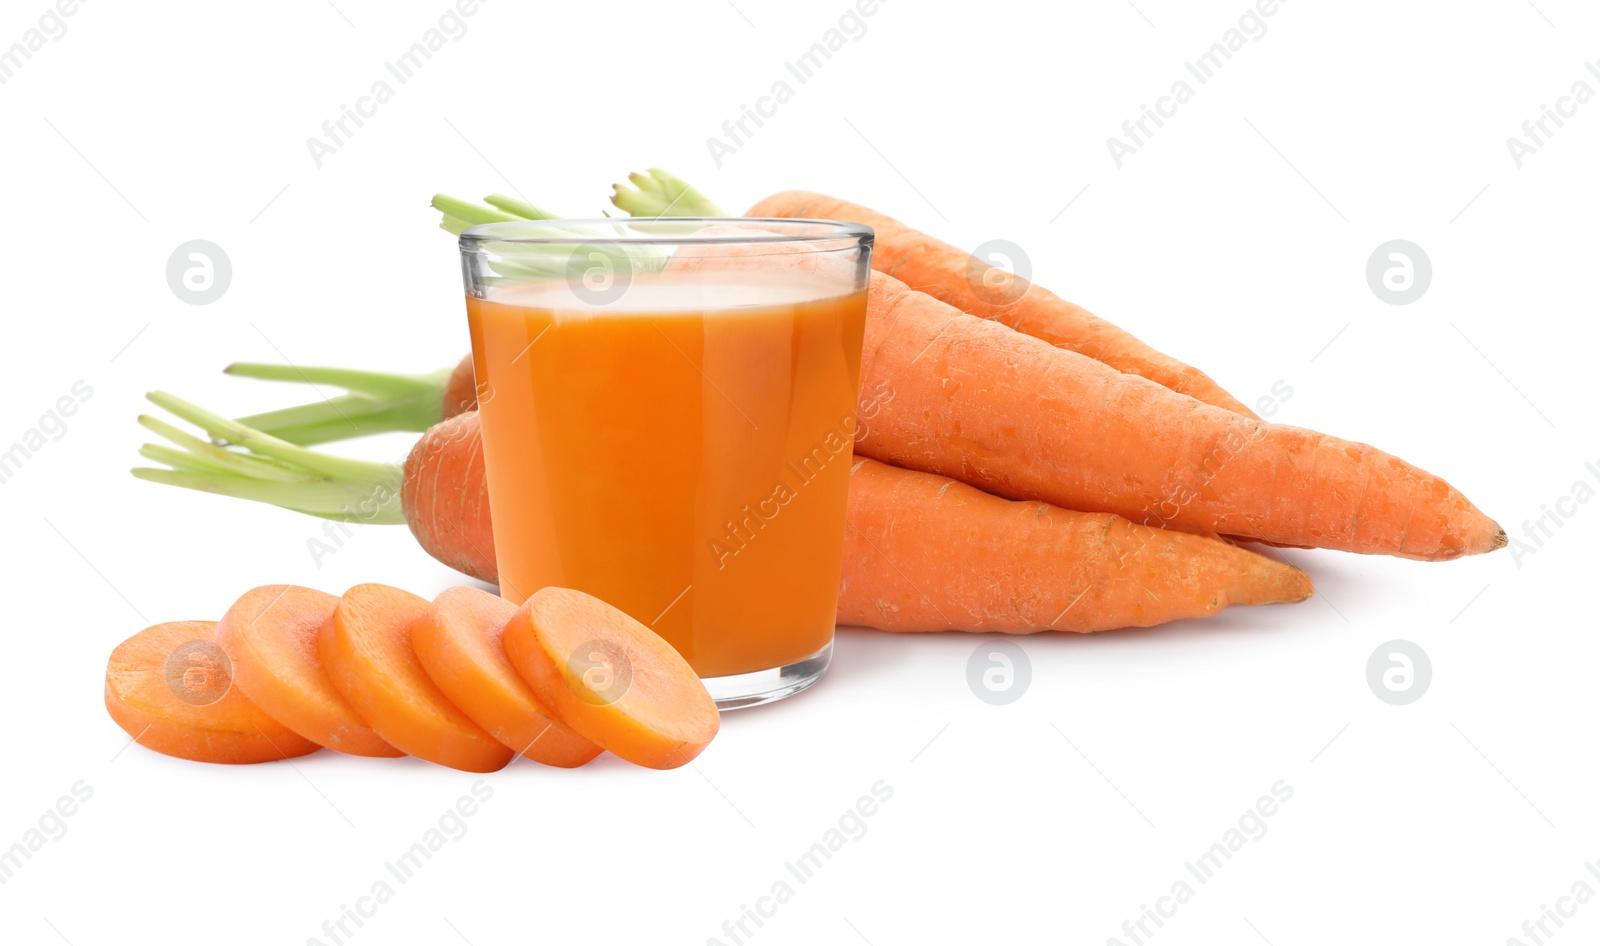 Image of Carrot juice and fresh vegetables on white background, banner design